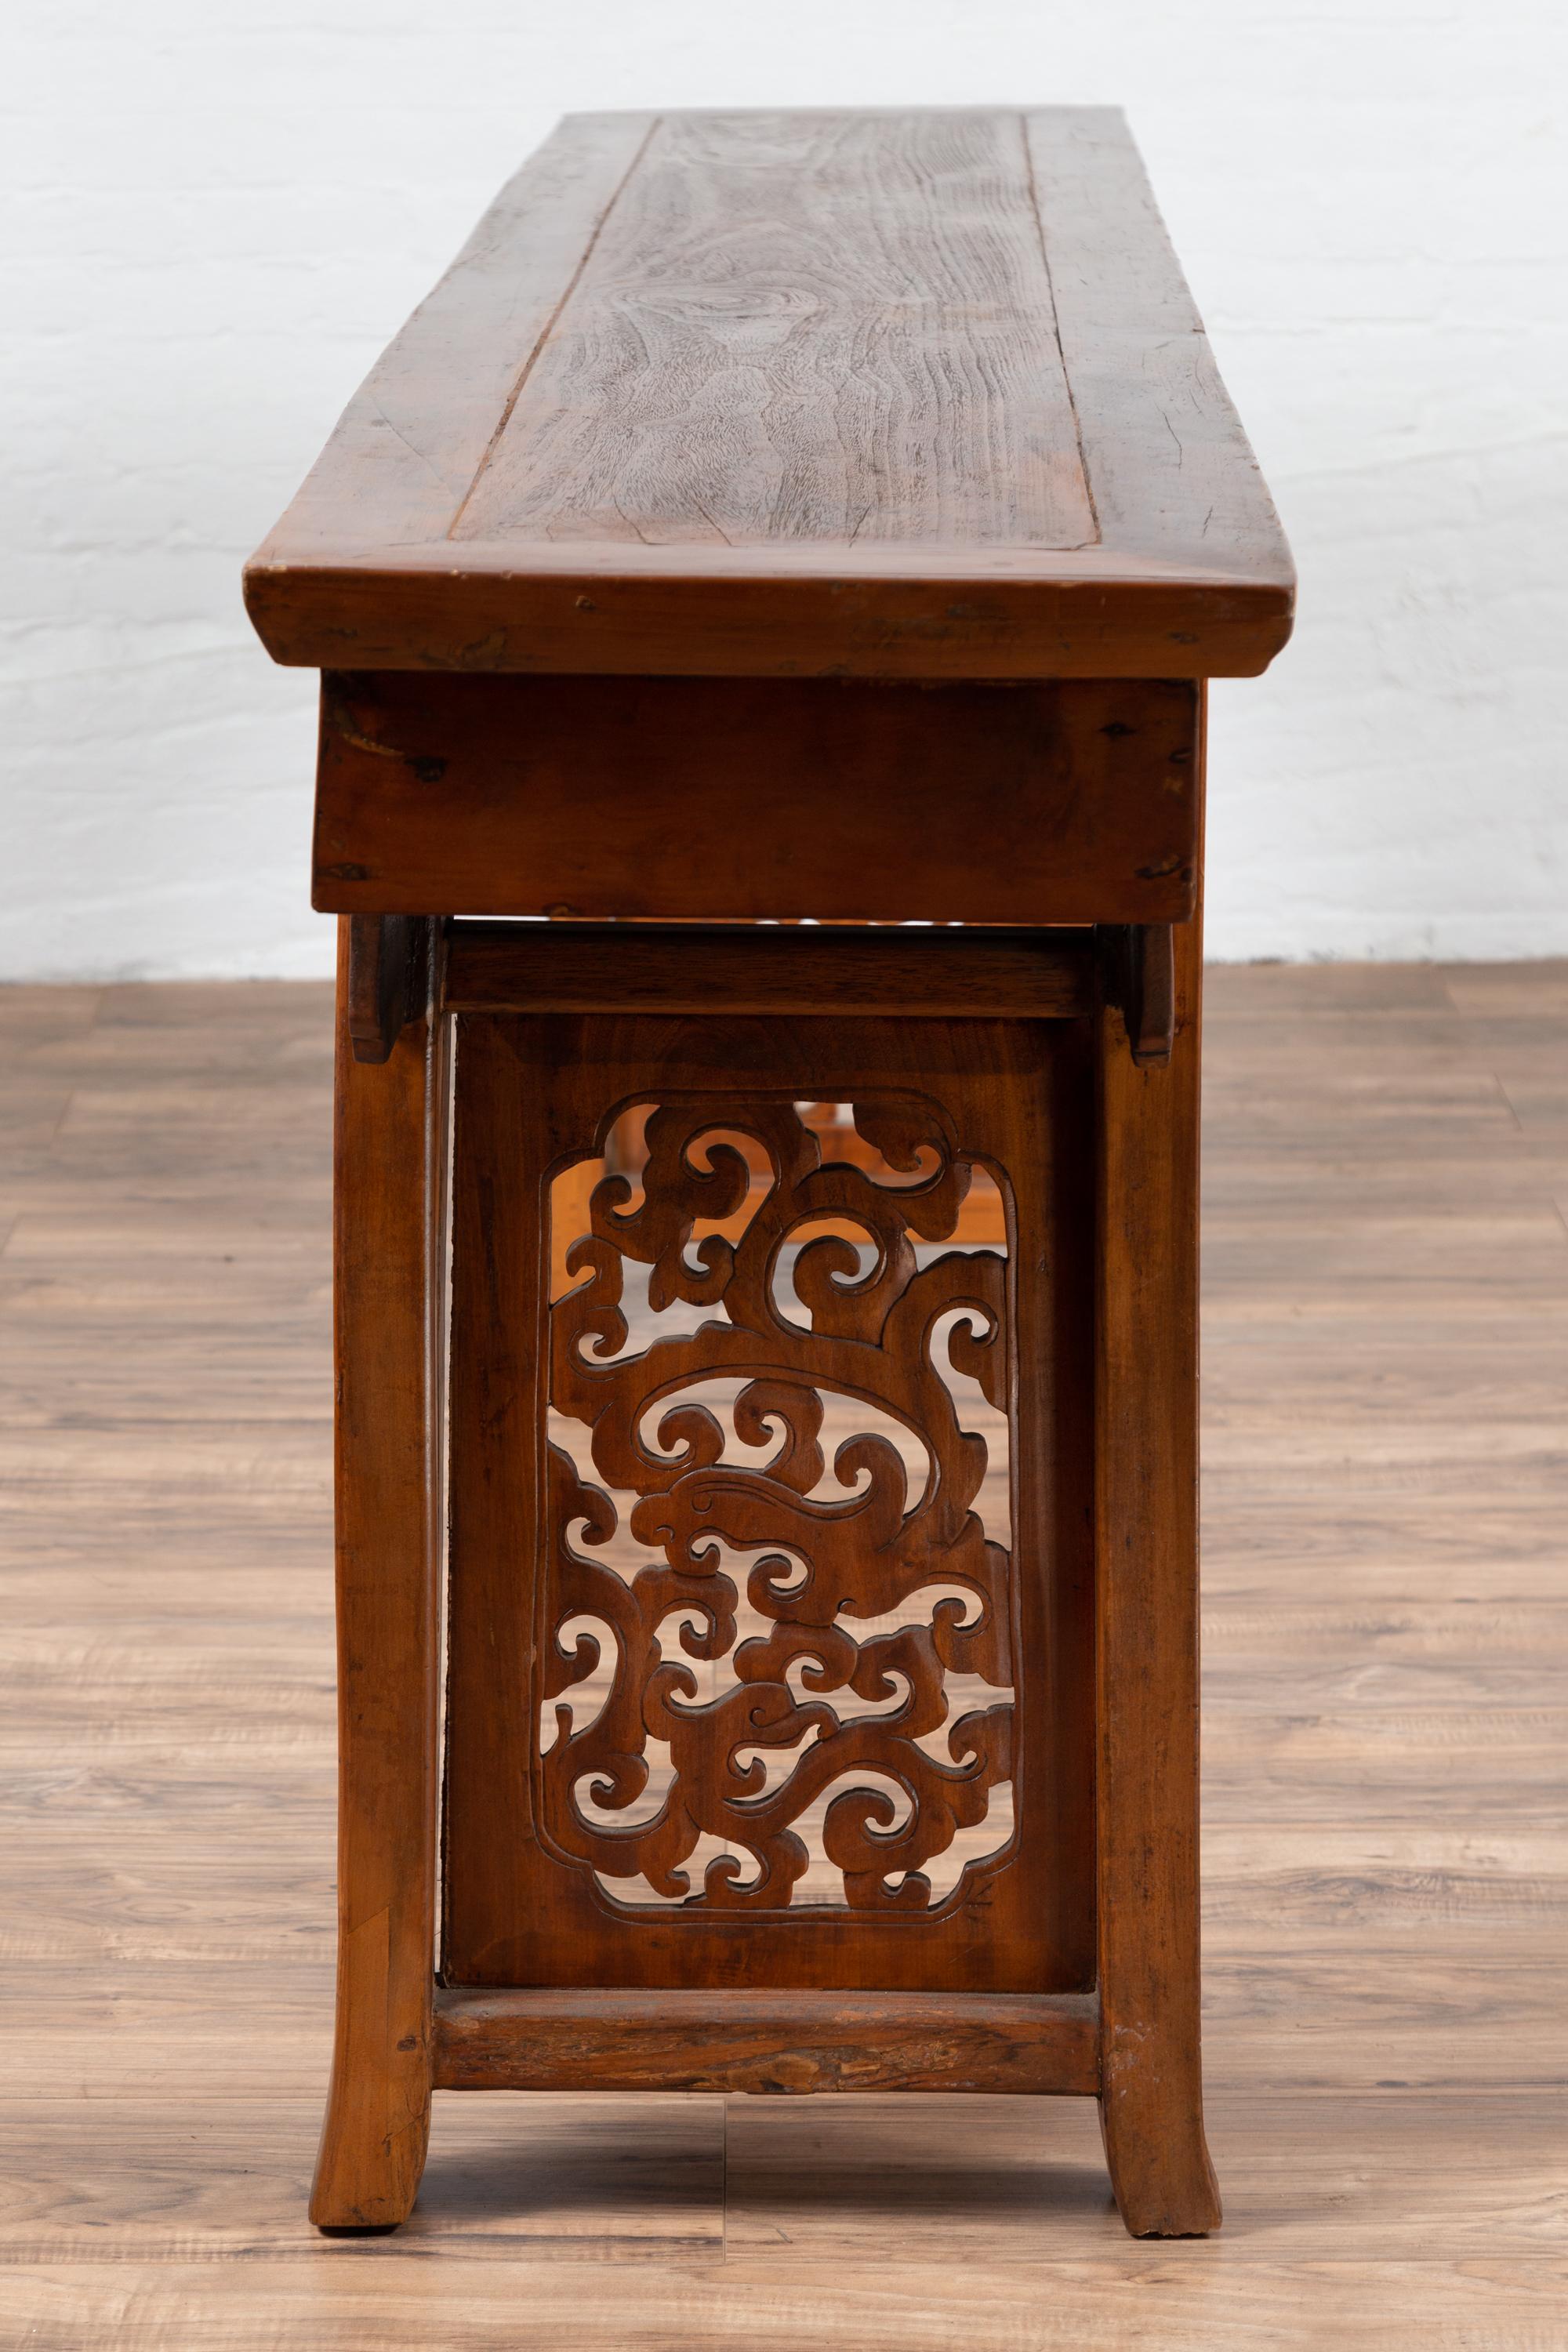 Chinese Antique Tall Altar Console Table with Meander Motifs and Carved Sides 3